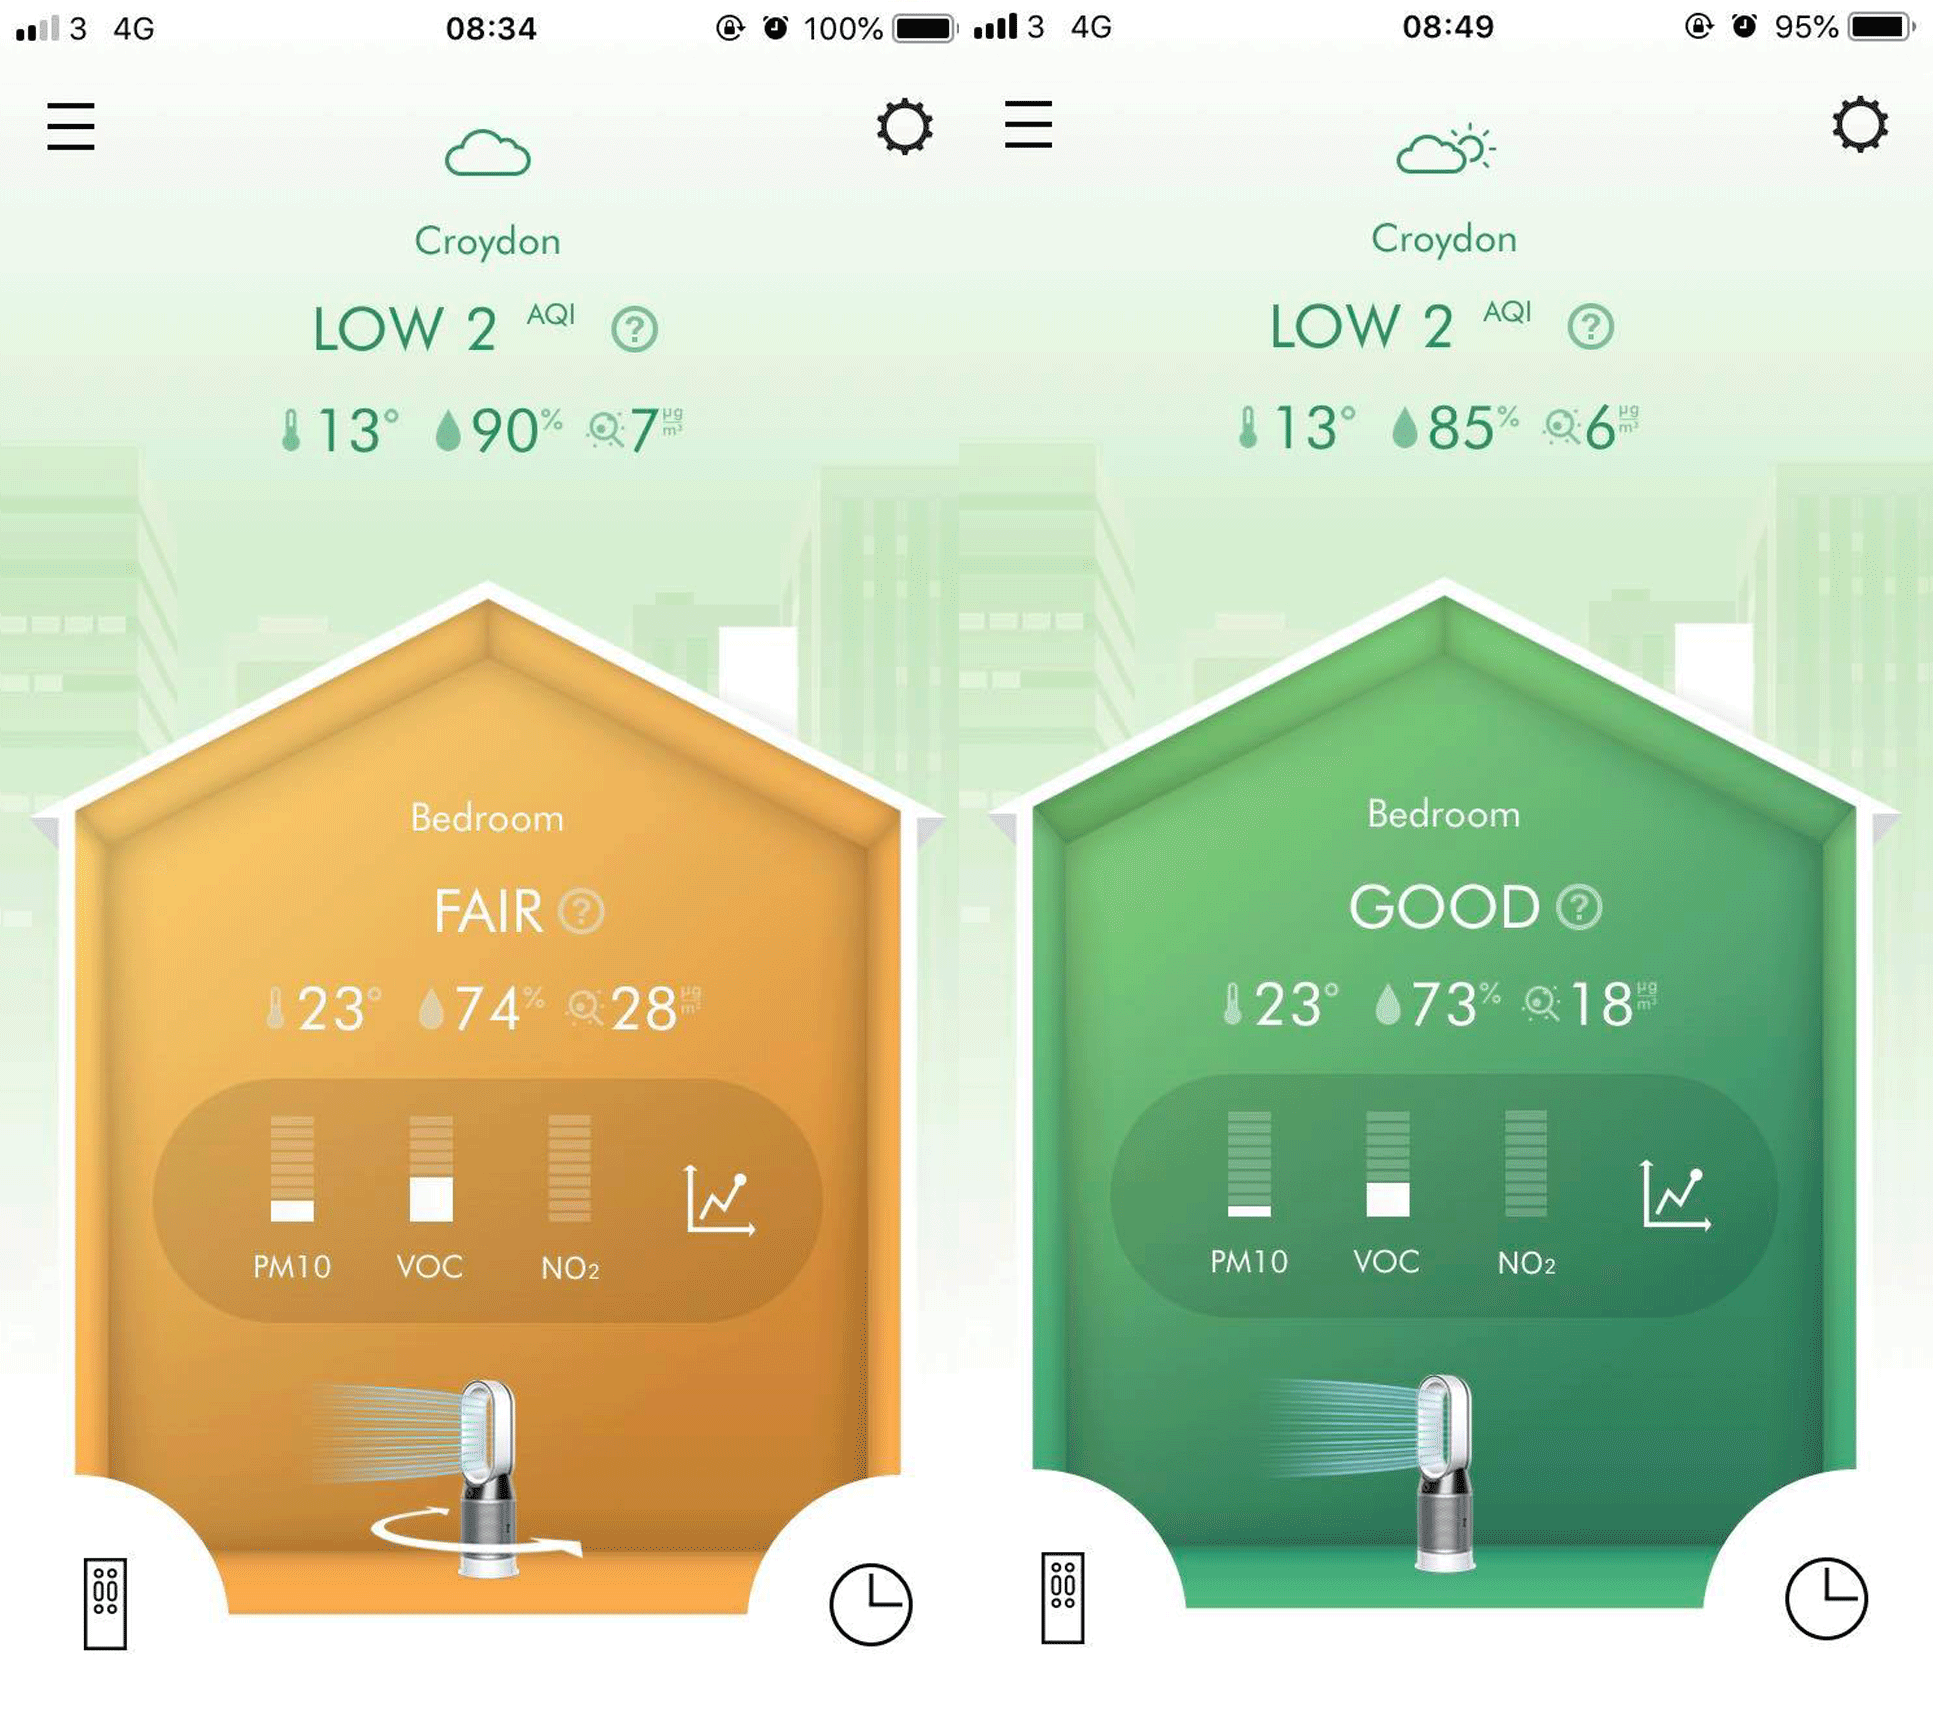 Dyson fan app statistics for purifying on a smartphone